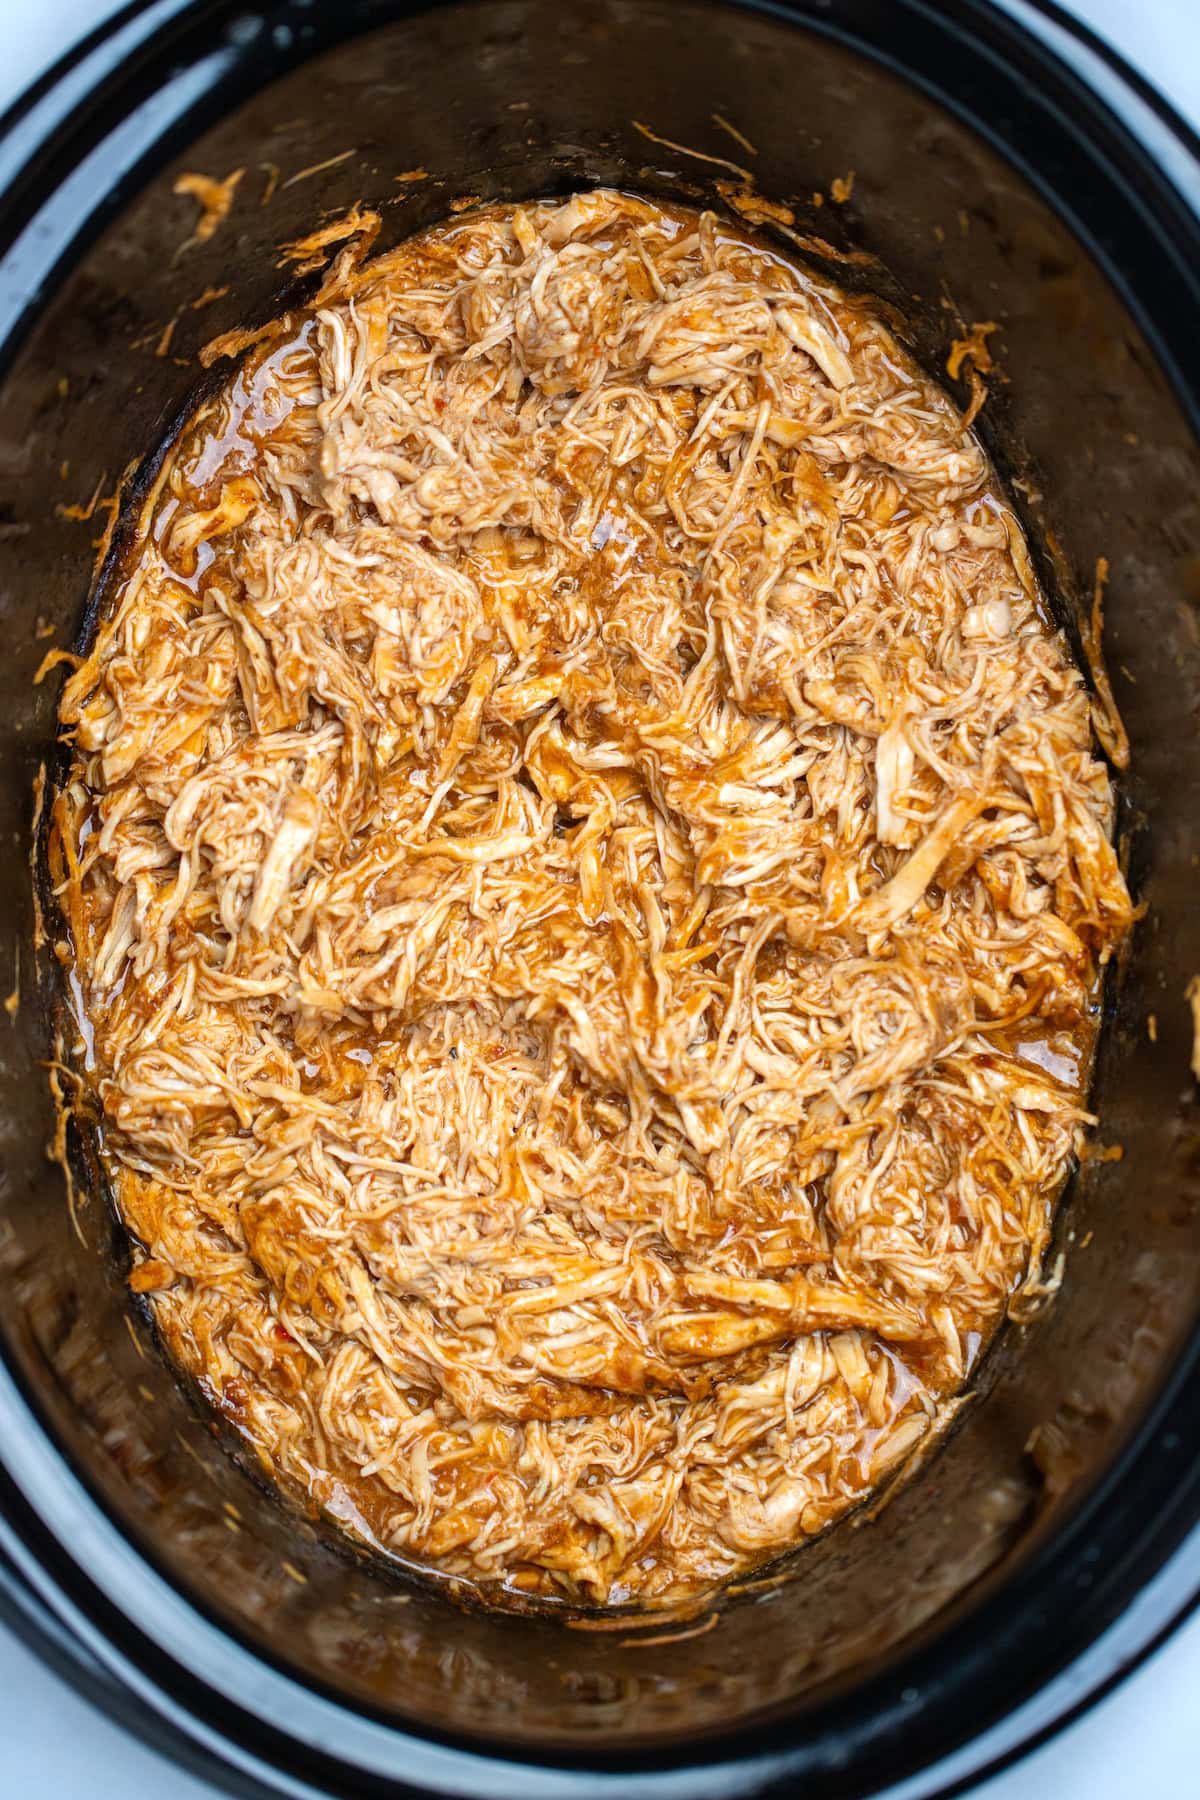 A slow cooker with saucy shredded BBQ chicken ready to be served.